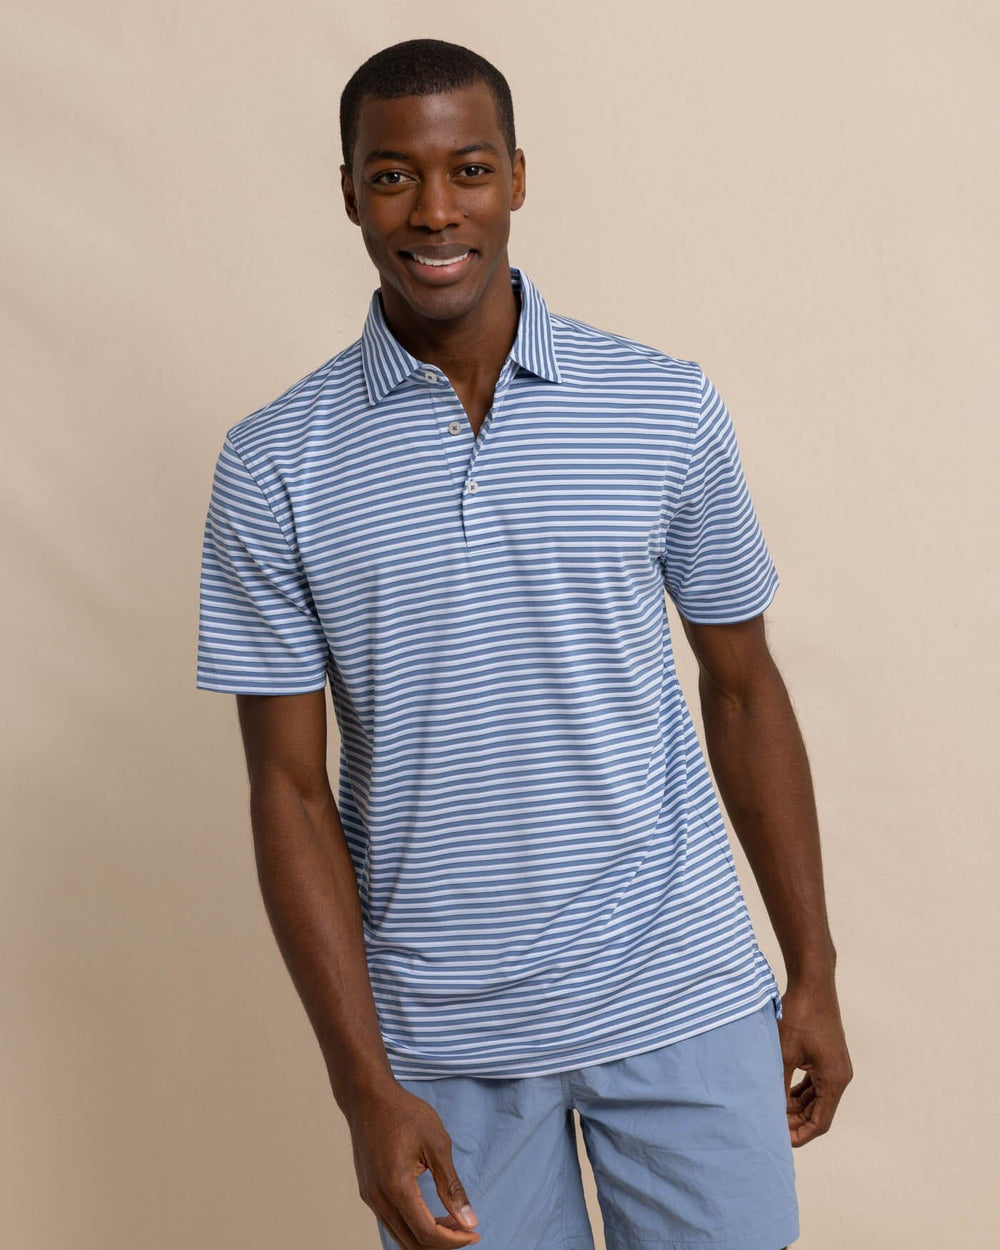 The front view of the Southern Tide Driver Carova Stripe Polo Shirt by Southern Tide - Coronet Blue